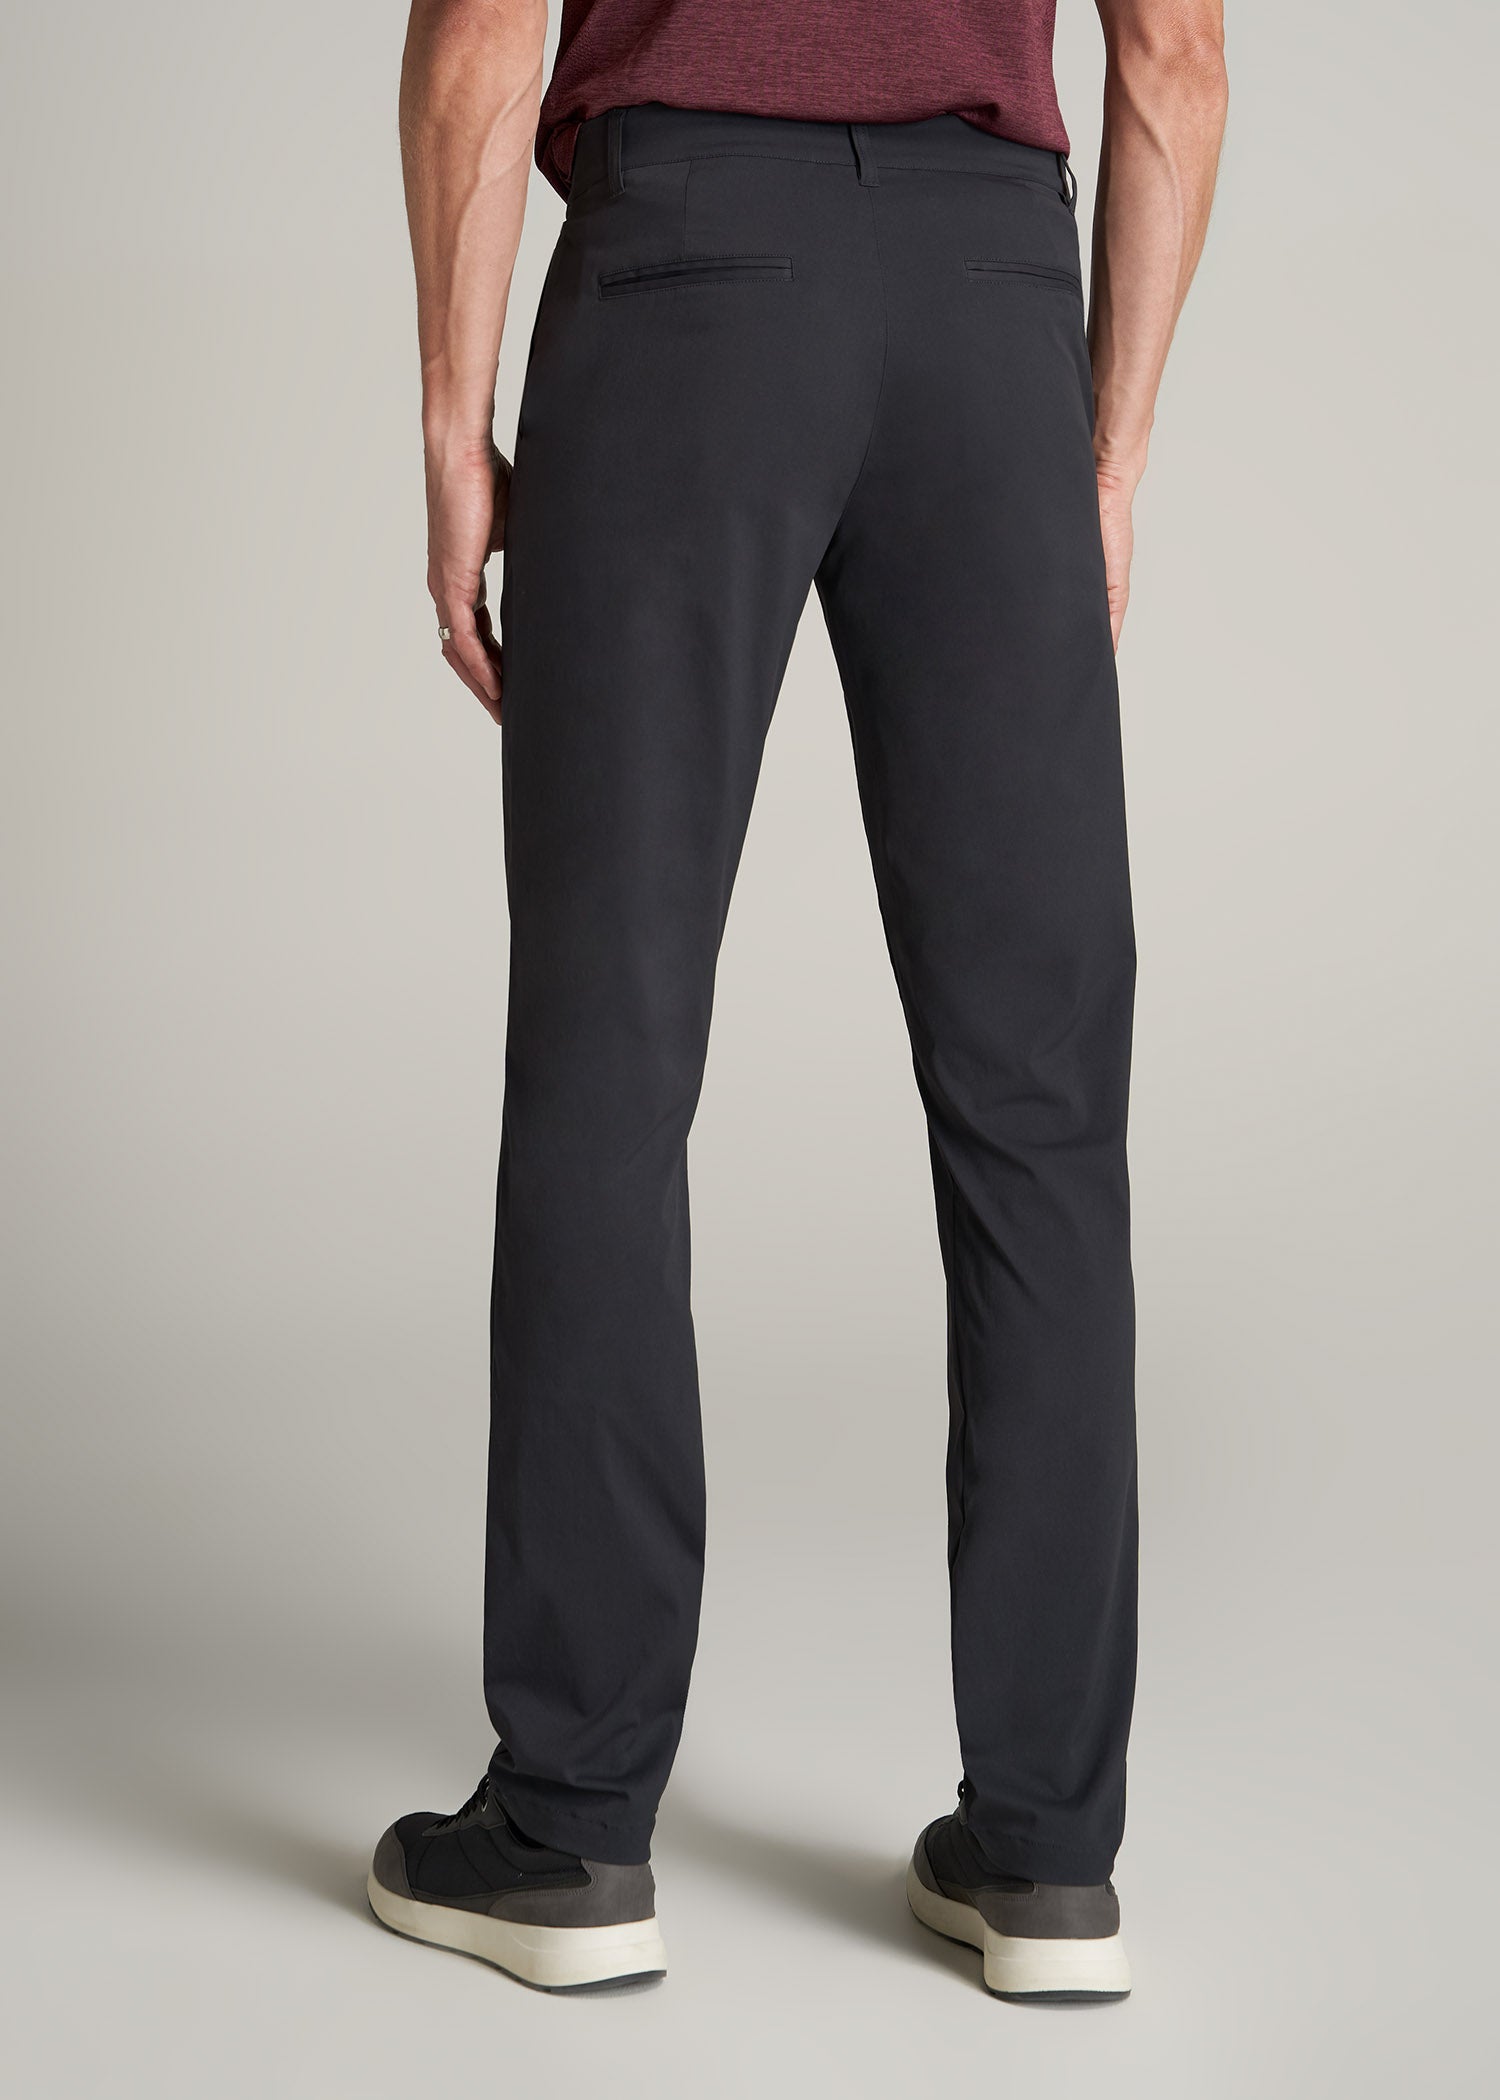 TAPERED FIT Traveler Chino Pants for Tall Men in Black